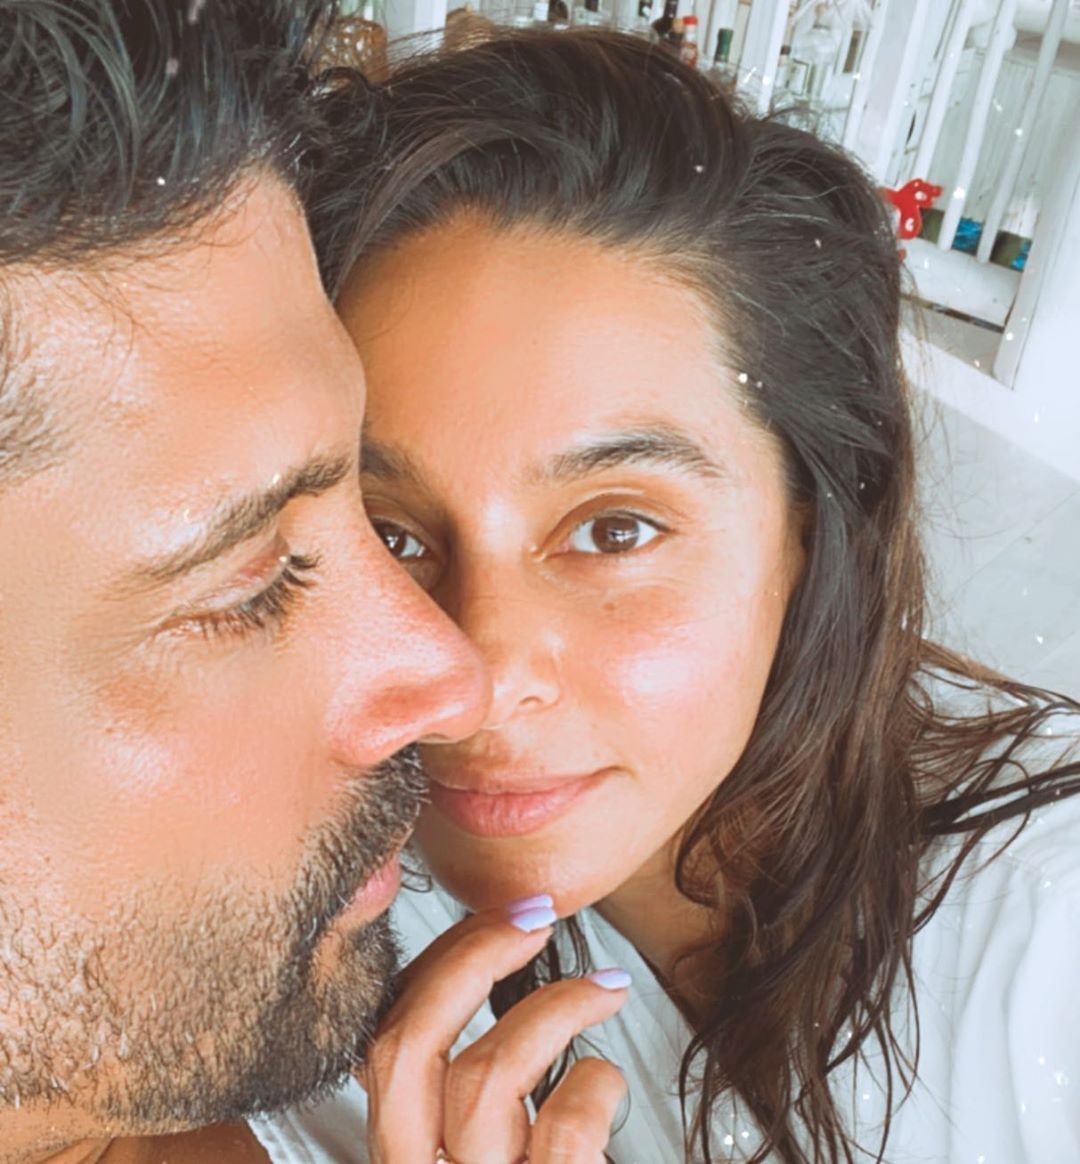 Shibani Dandekar Posts A Love Up Picture With Farhan Akhtar Says, 'Clearly Didn’t Get The Social Distancing Memo'